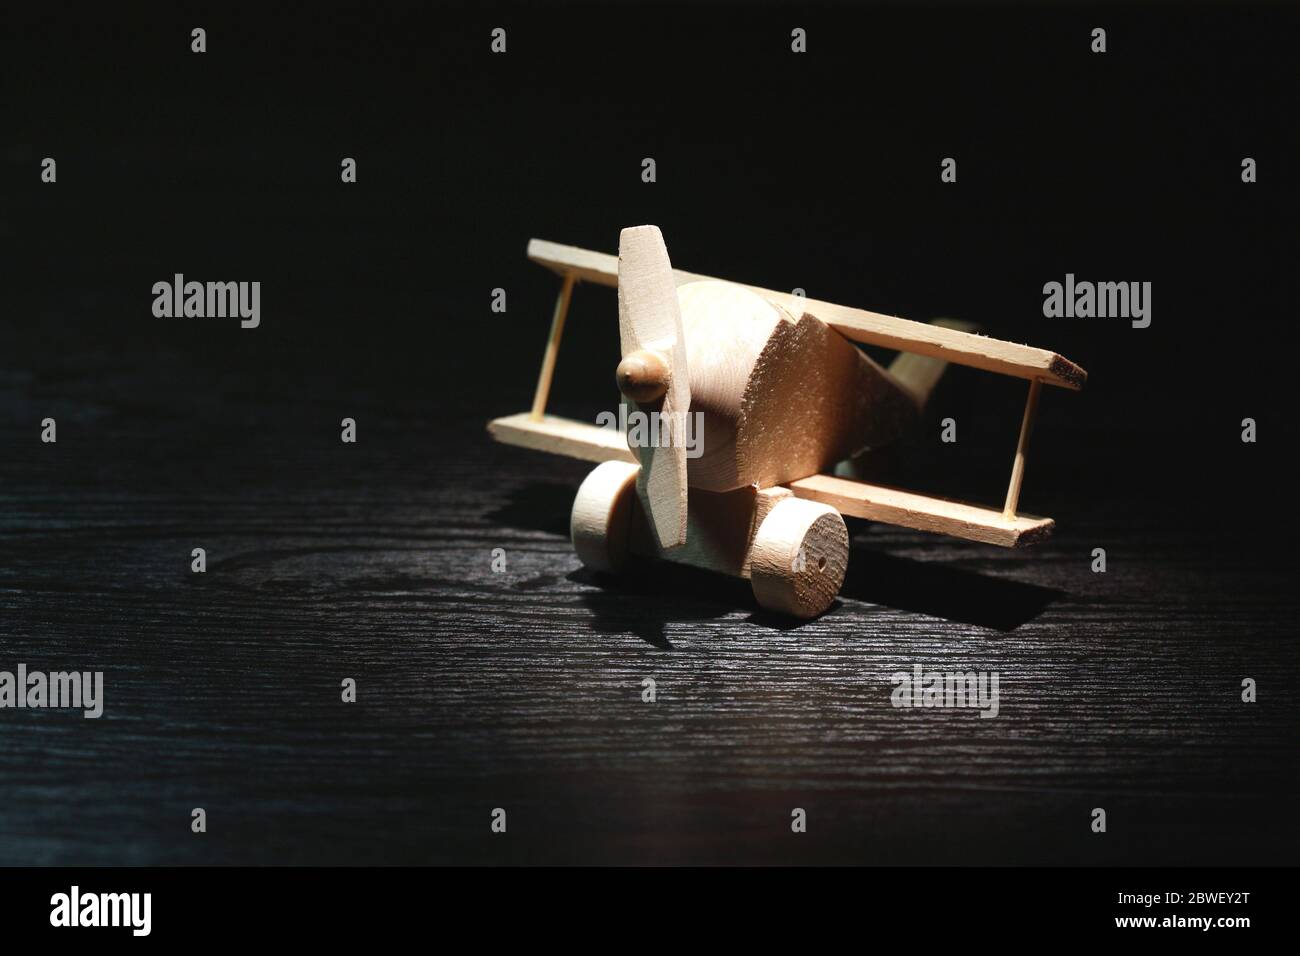 Travel concept. Small wooden airplane under beam of light on dark background Stock Photo